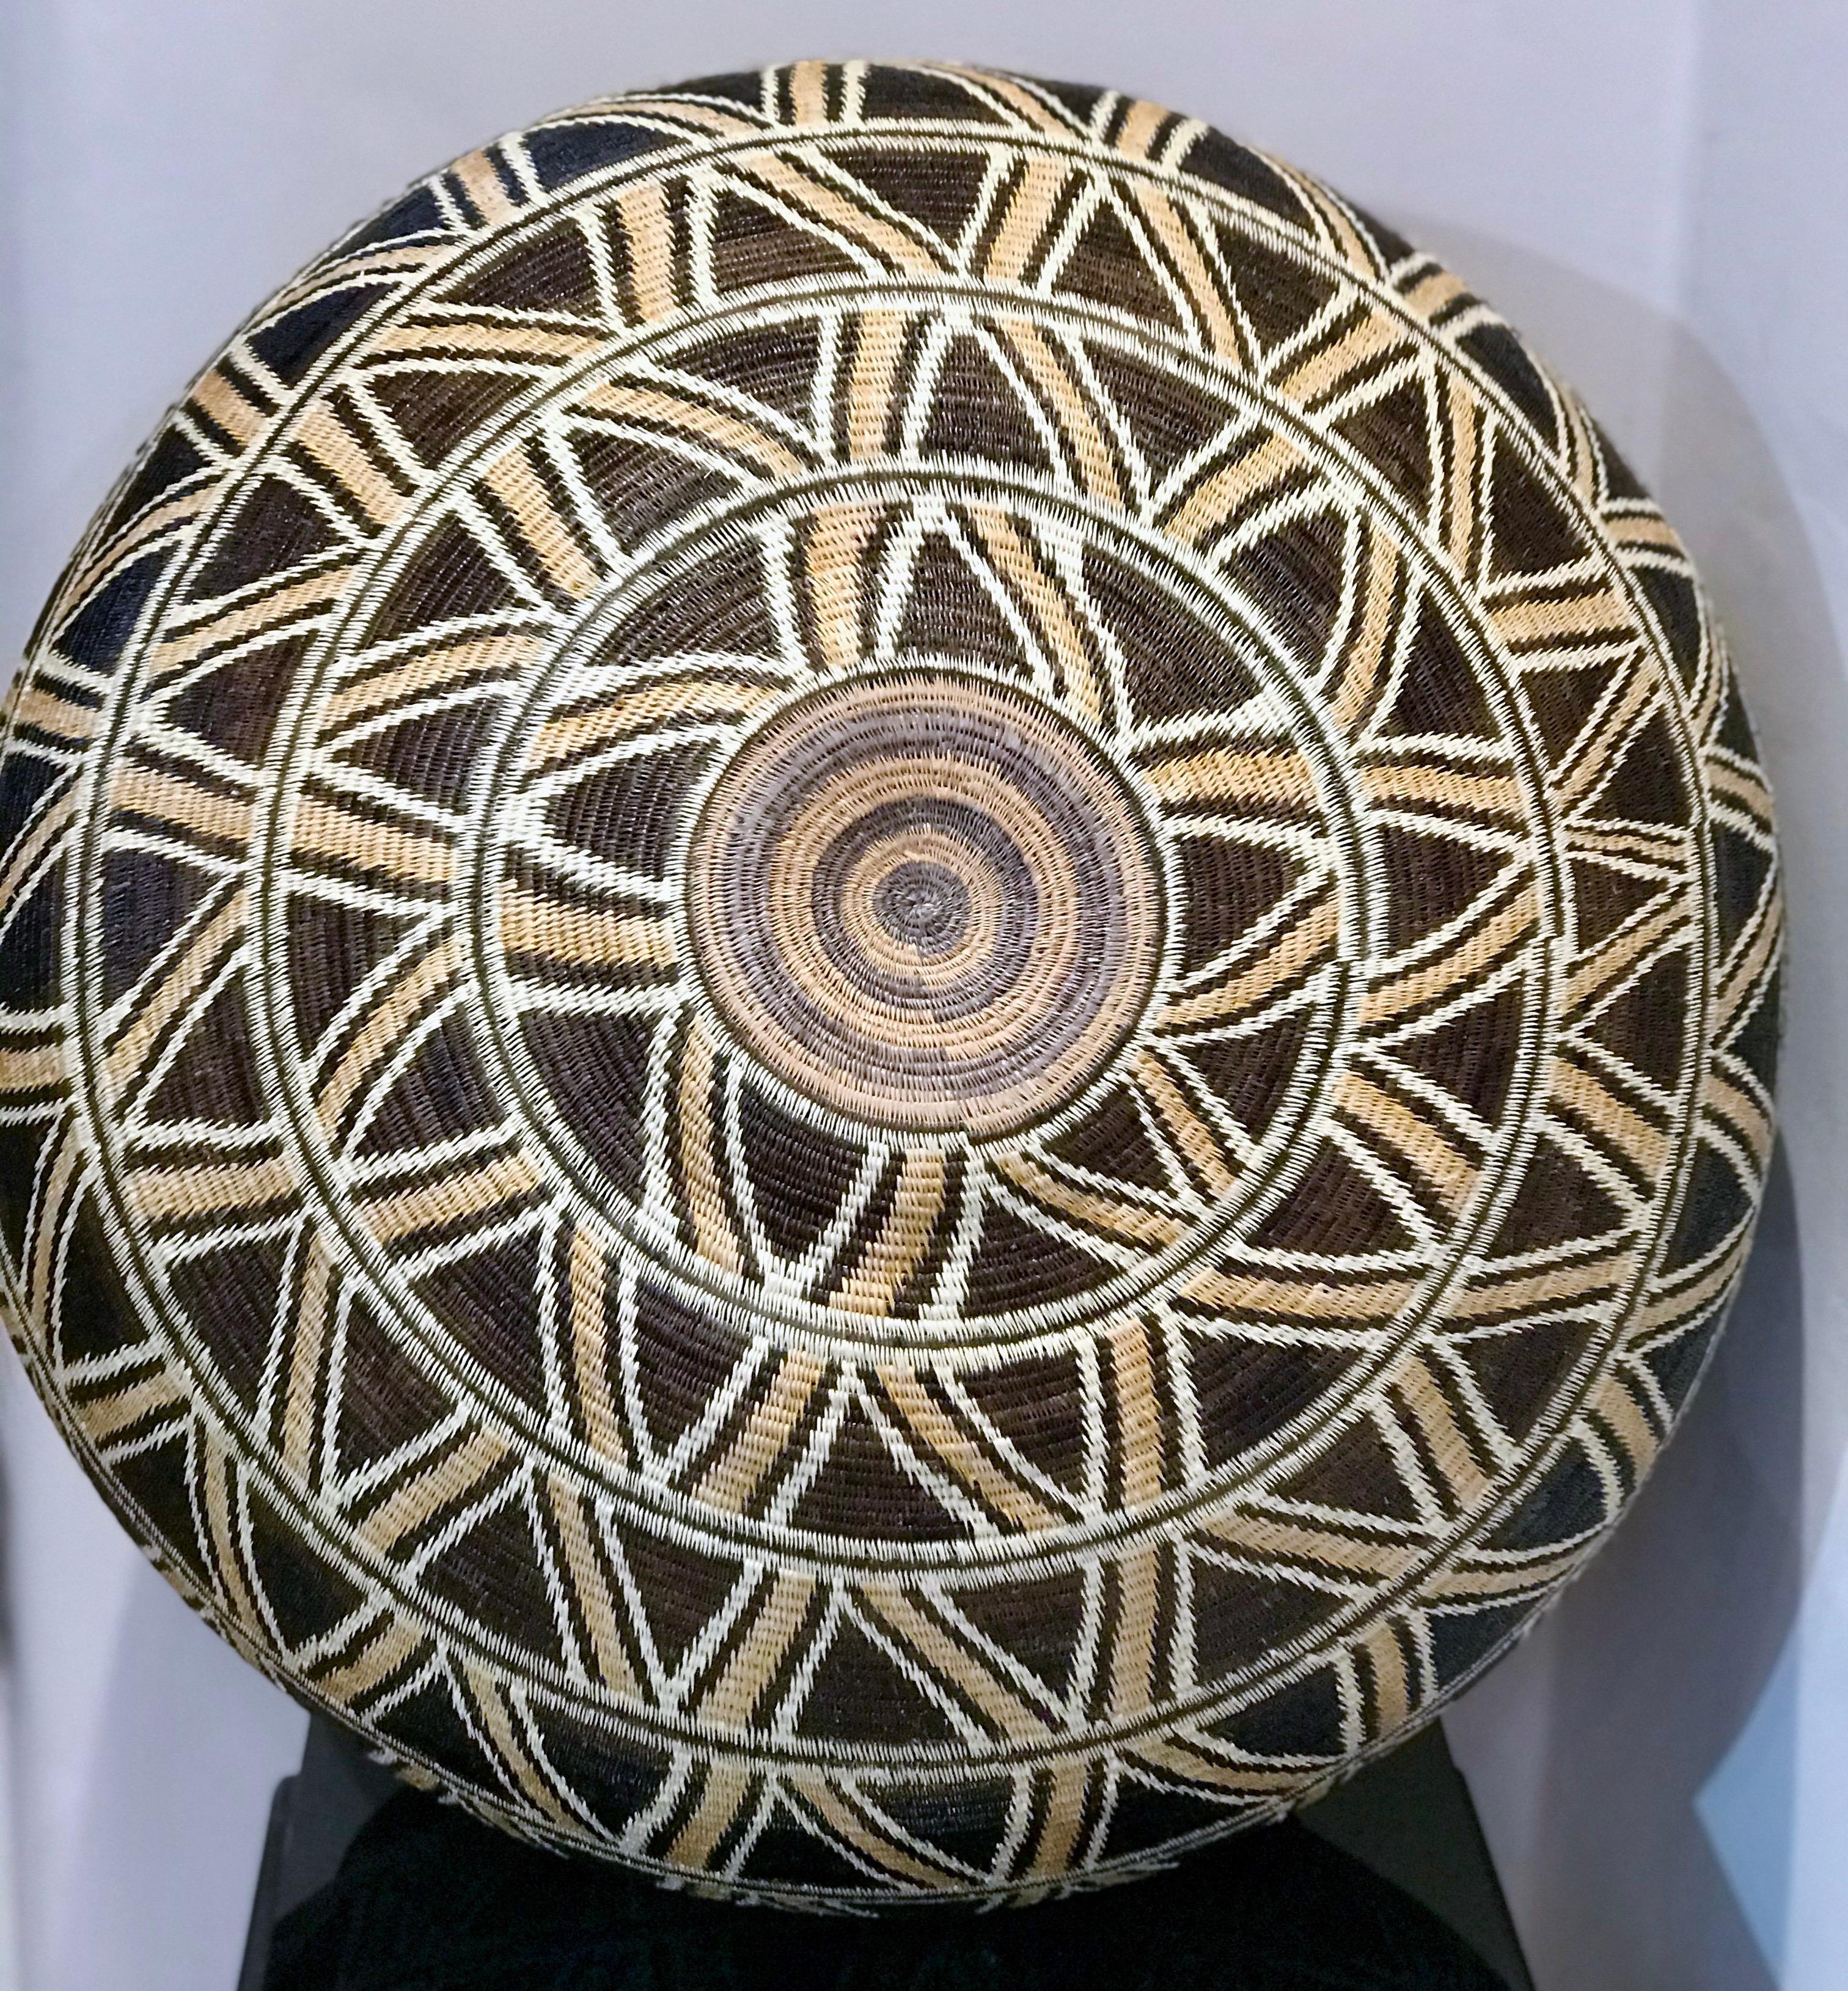 Basket by Elsa Quiros, large geometric design in brown, tan, white sunflower 1